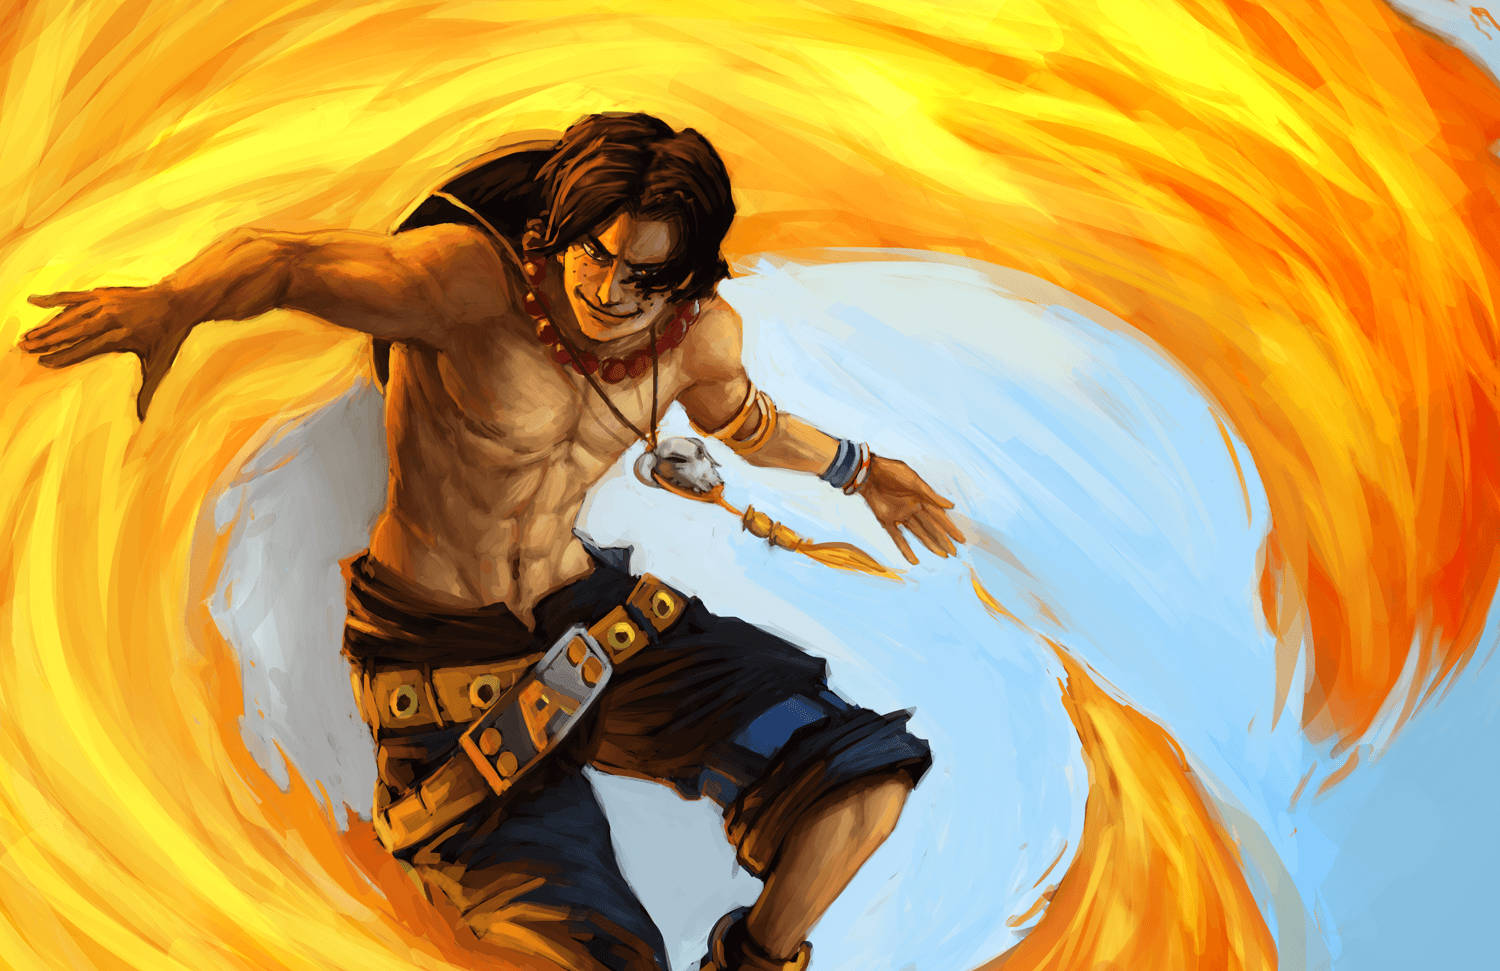 One Piece Ace Fire Surfing Wallpaper